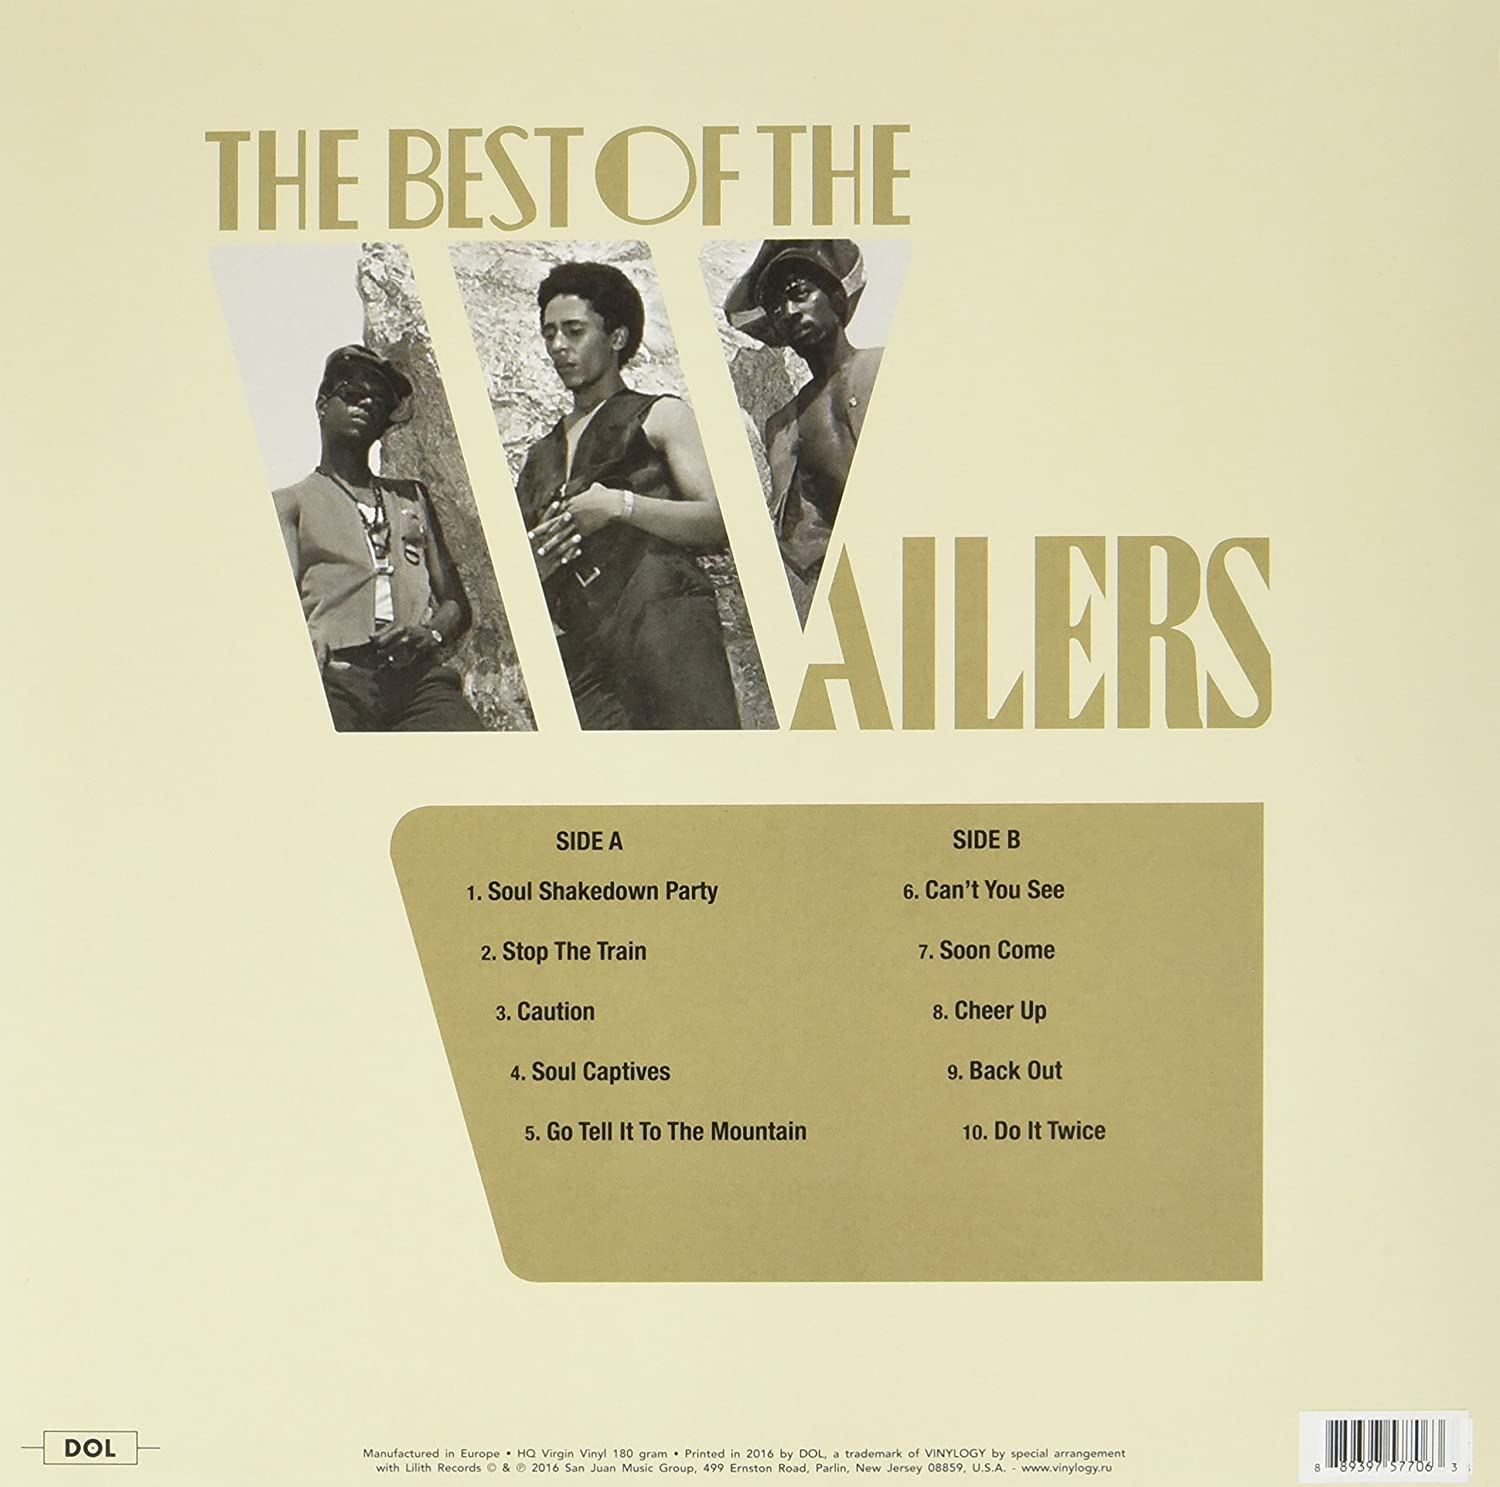 Wailers, The/Best Of [LP] – Taz Records